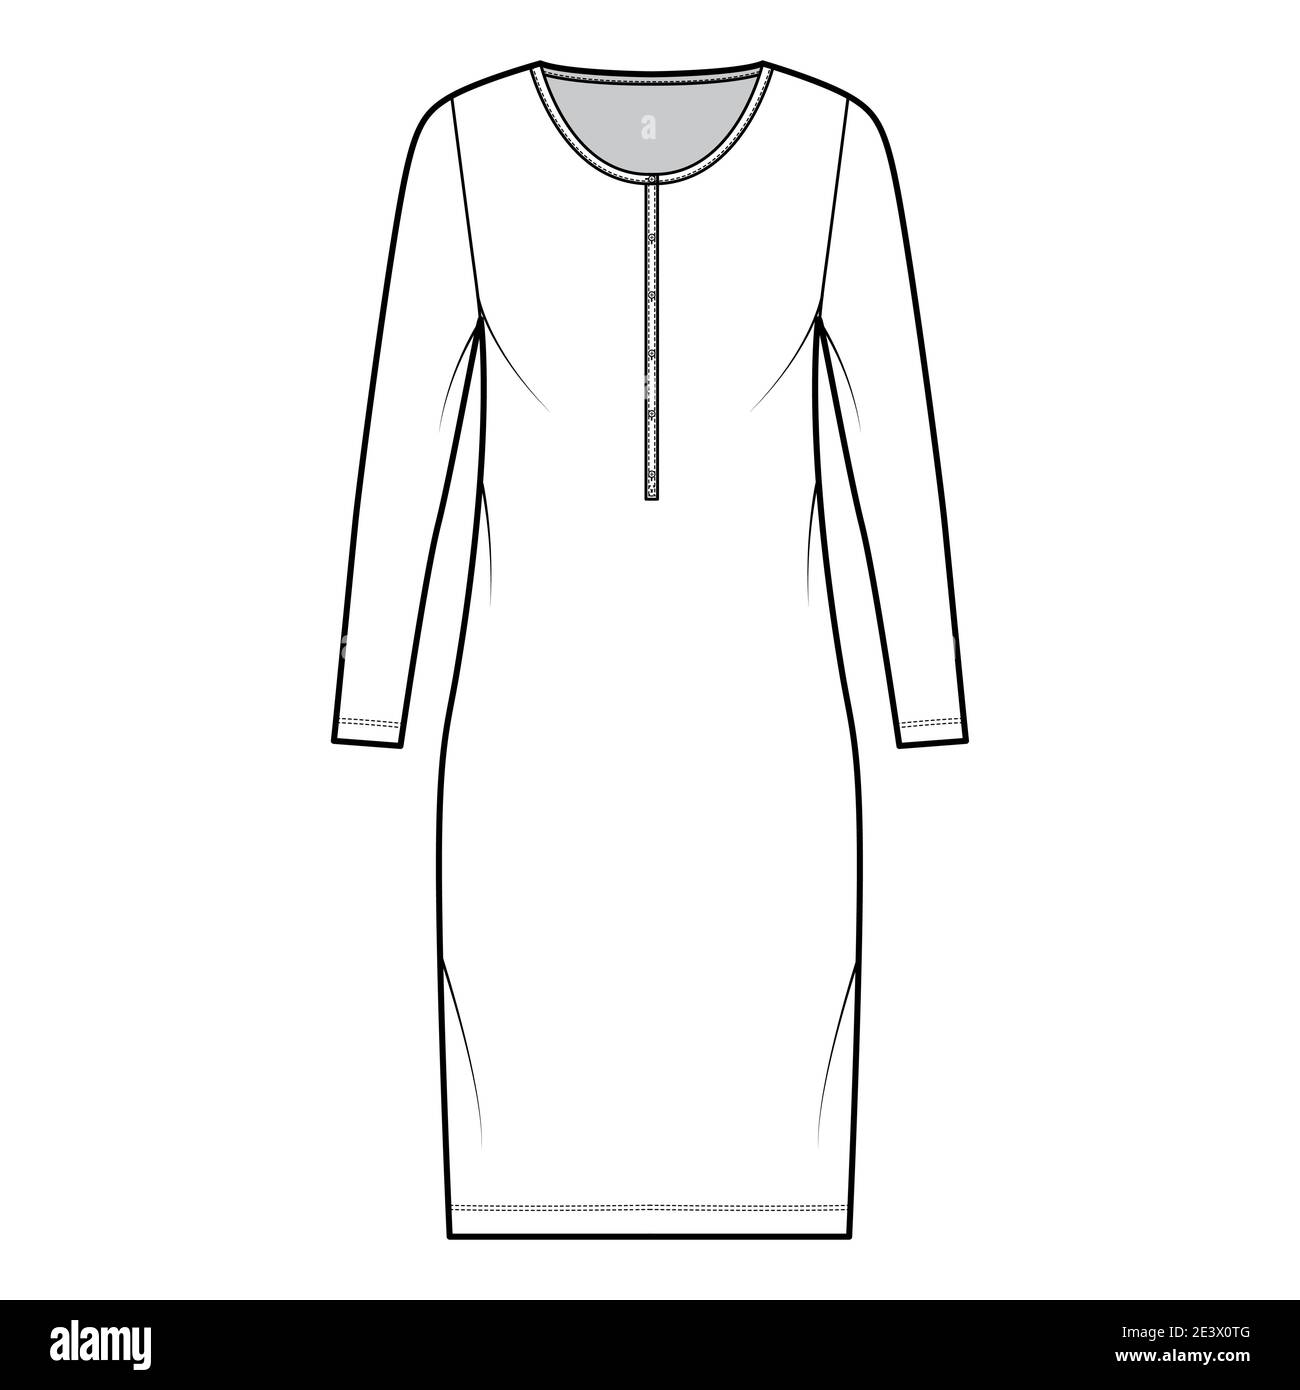 Turn your fashion sketches from OK to AWESOME The Mockup method   sewingnpatterns